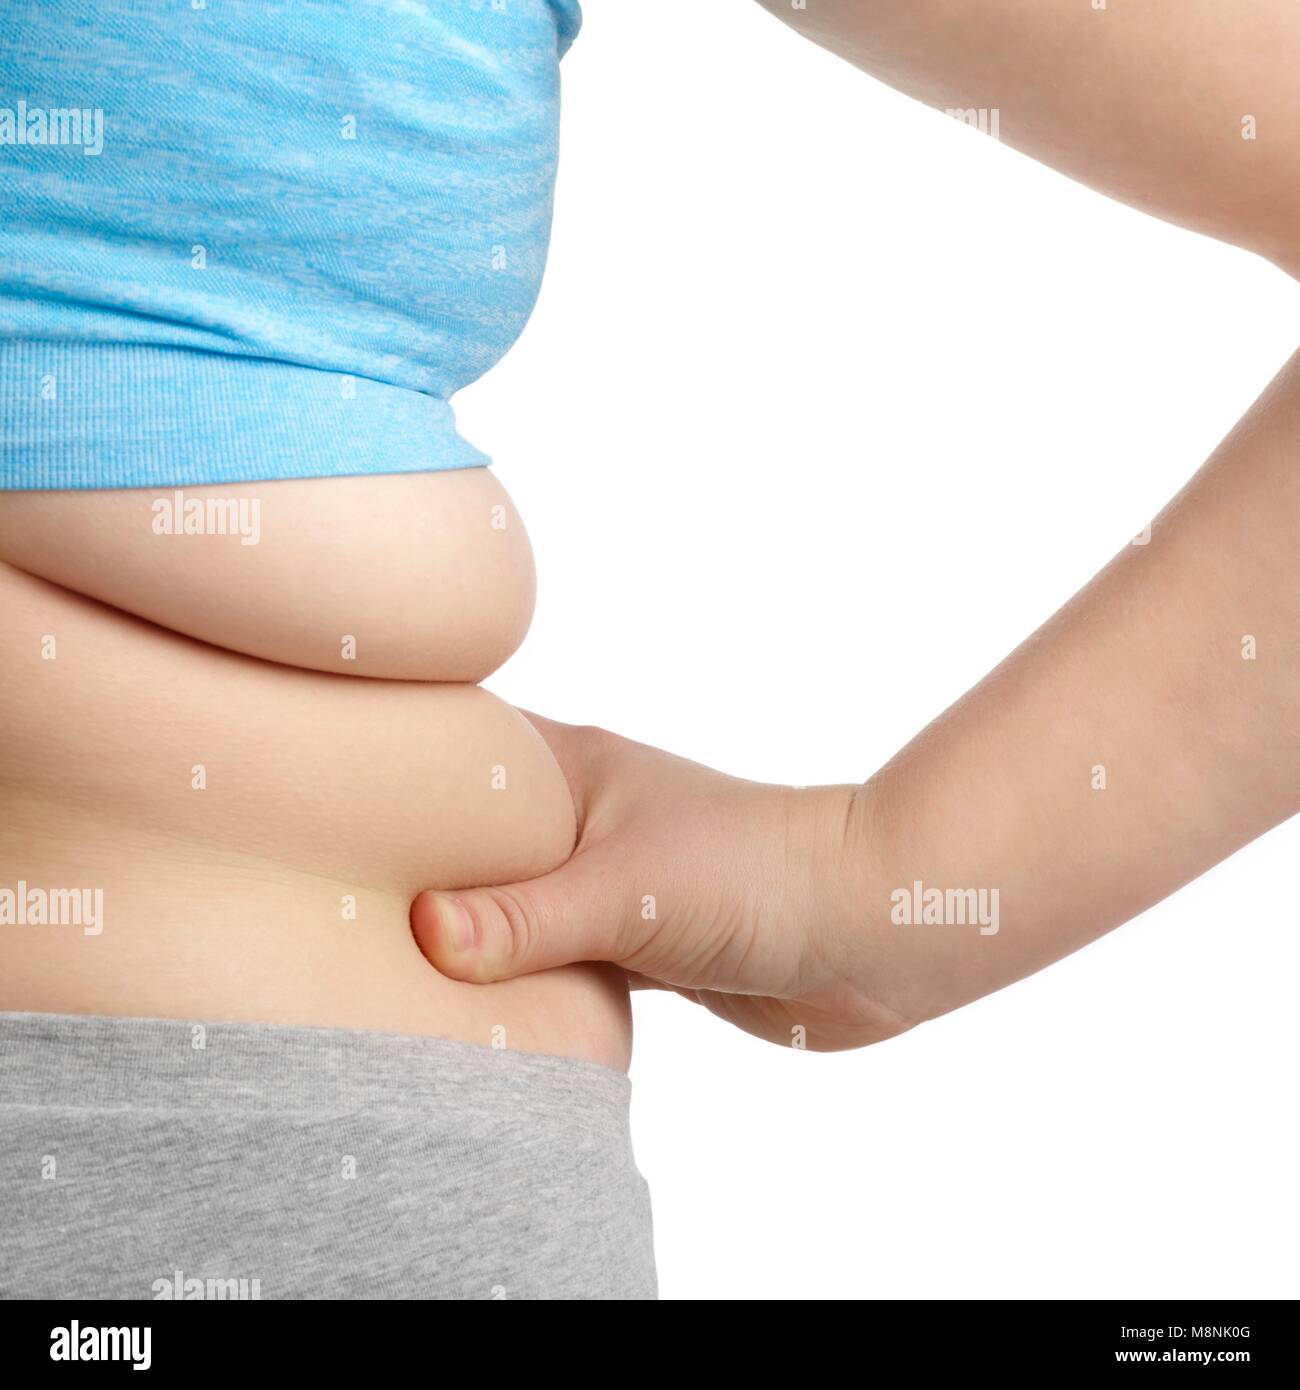 Overweight woman with hand on hip. Stock Photo